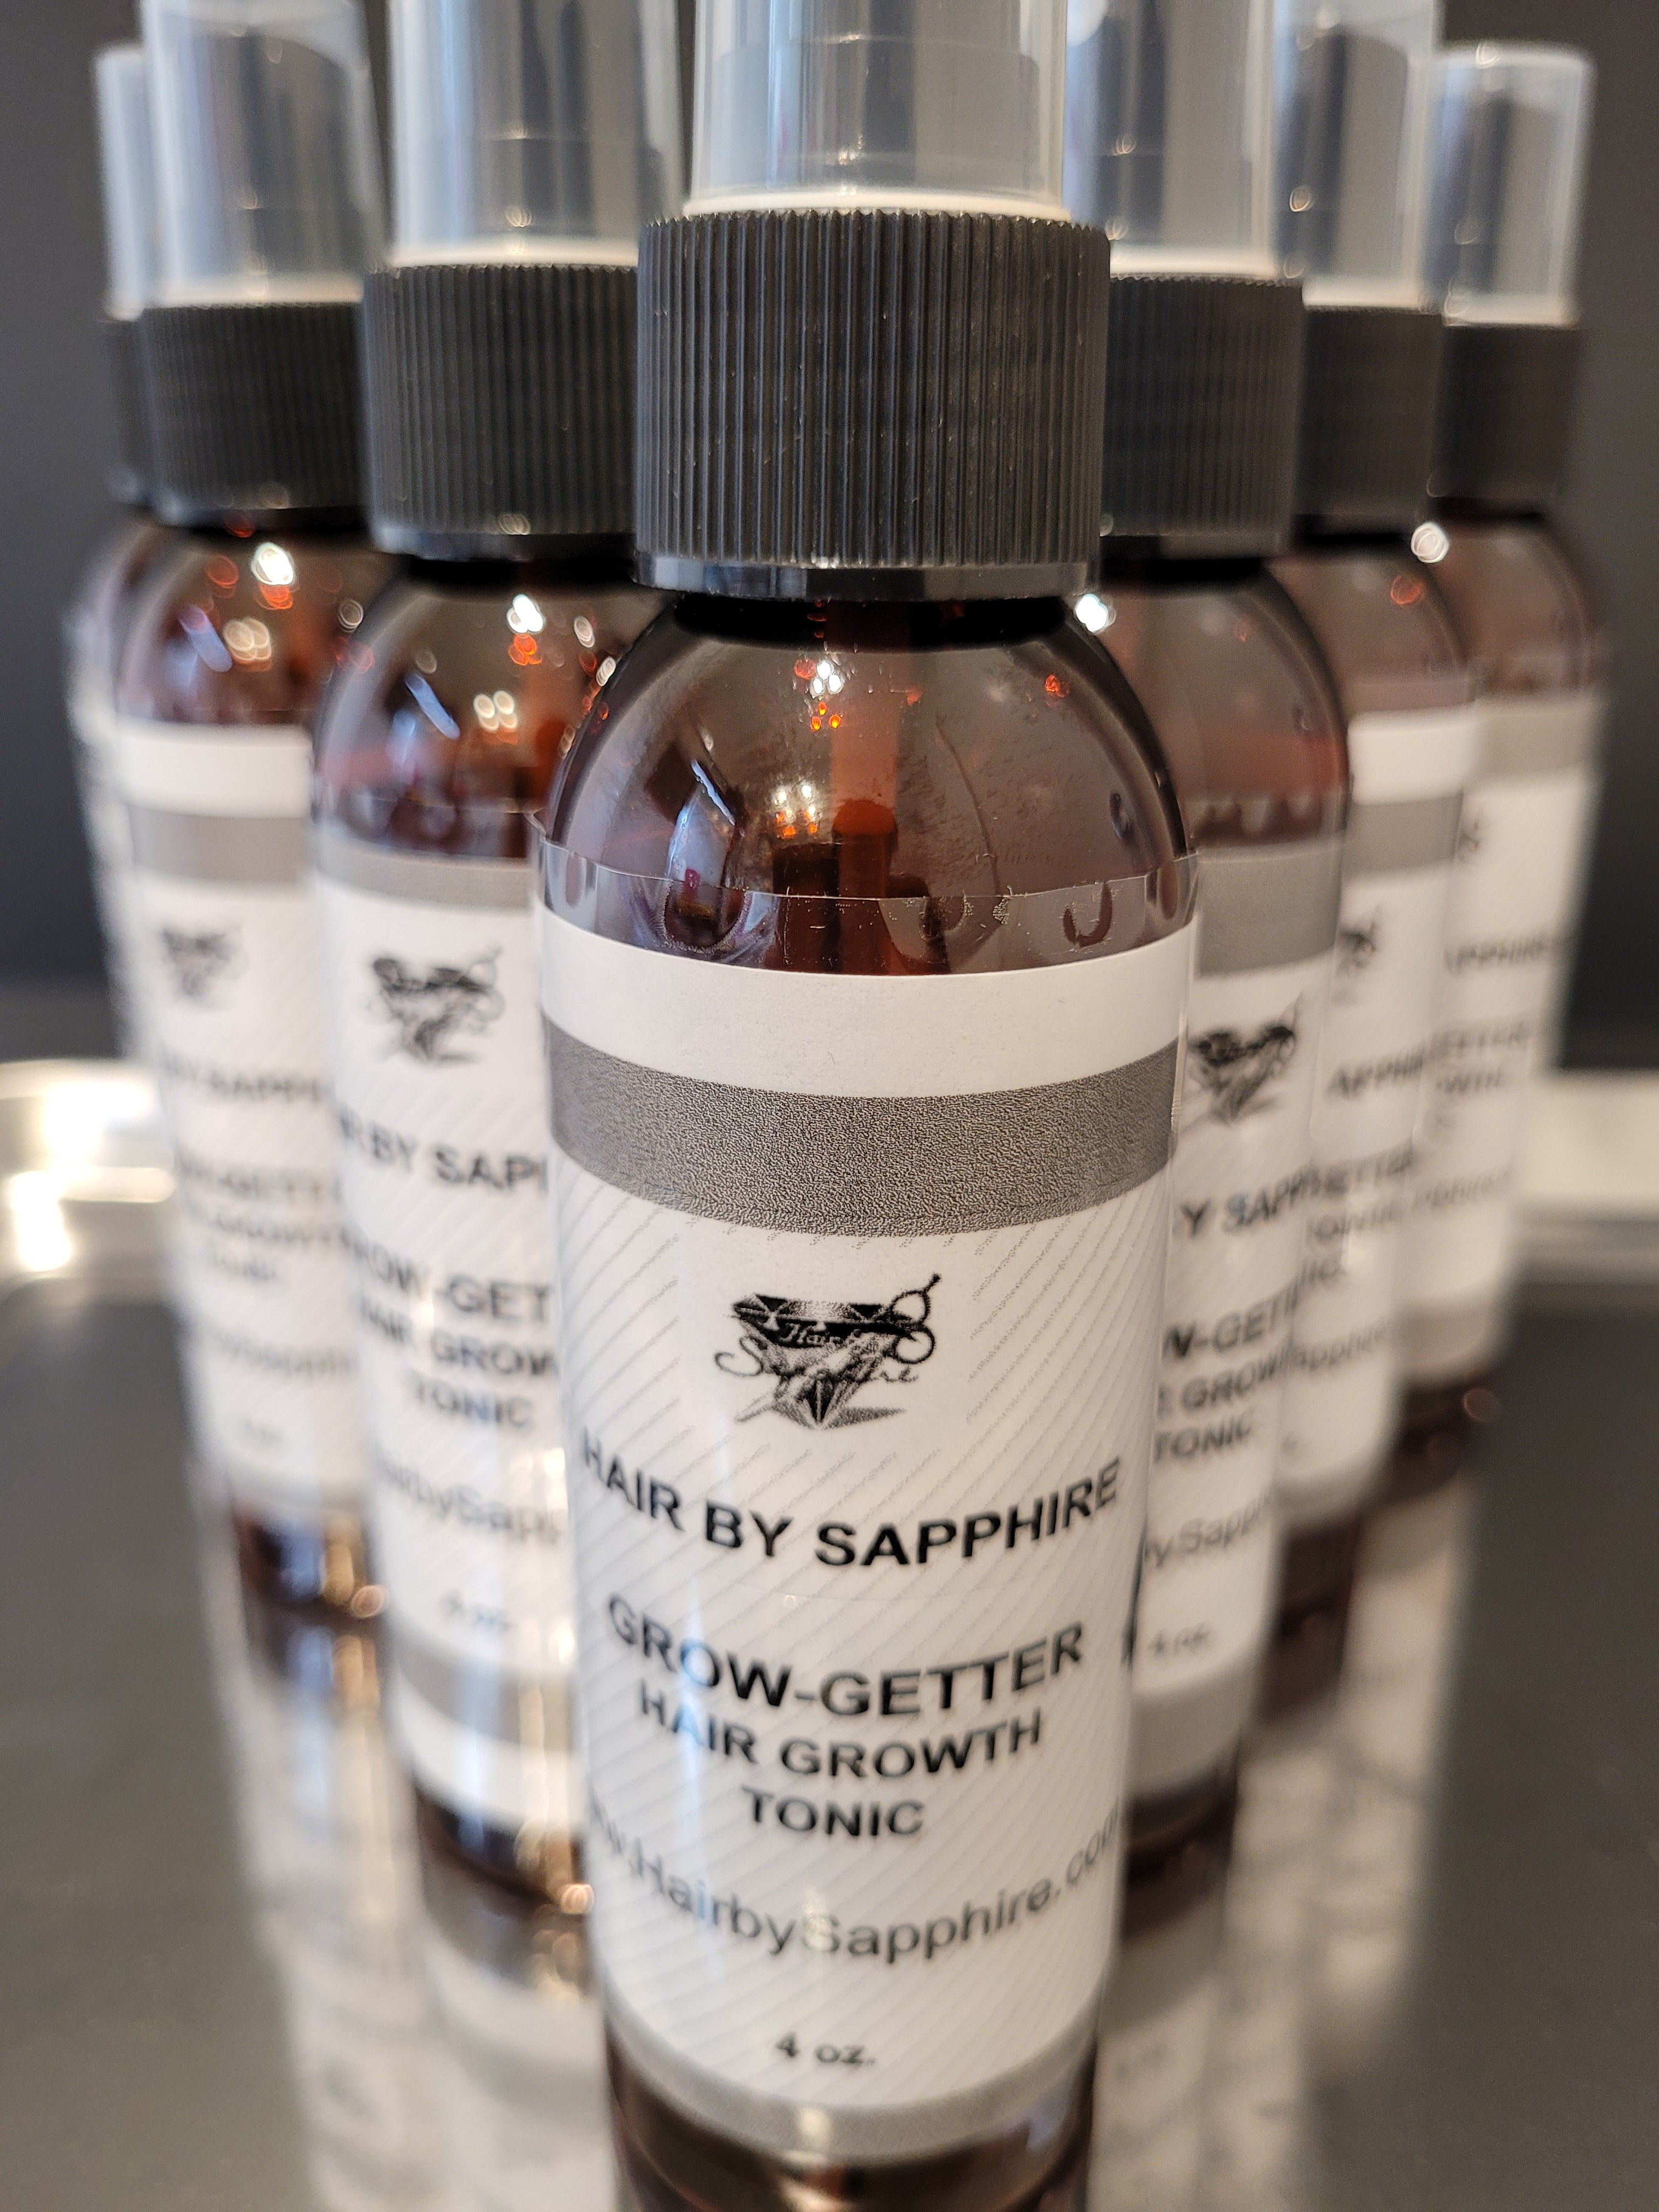 "GROW-GETTER" HAIR GROWTH TONIC BY SAPPHIRE